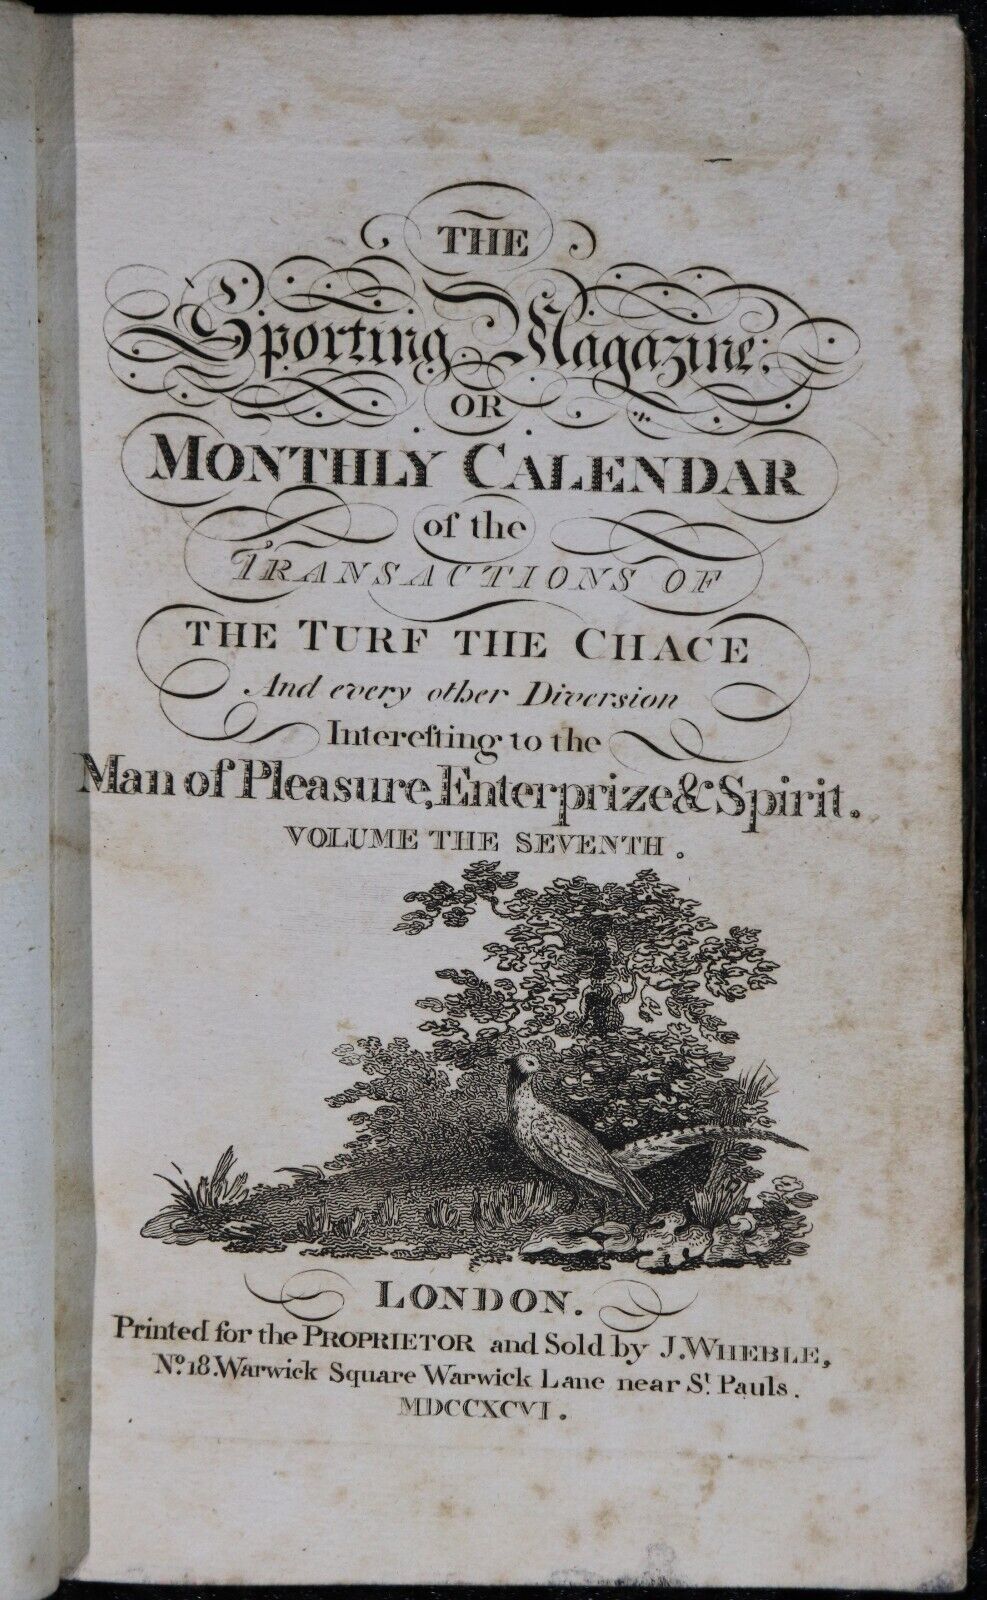 The Sporting Magazine: Monthly Calendar - 1796 - Antiquarian Sport History Book - 0